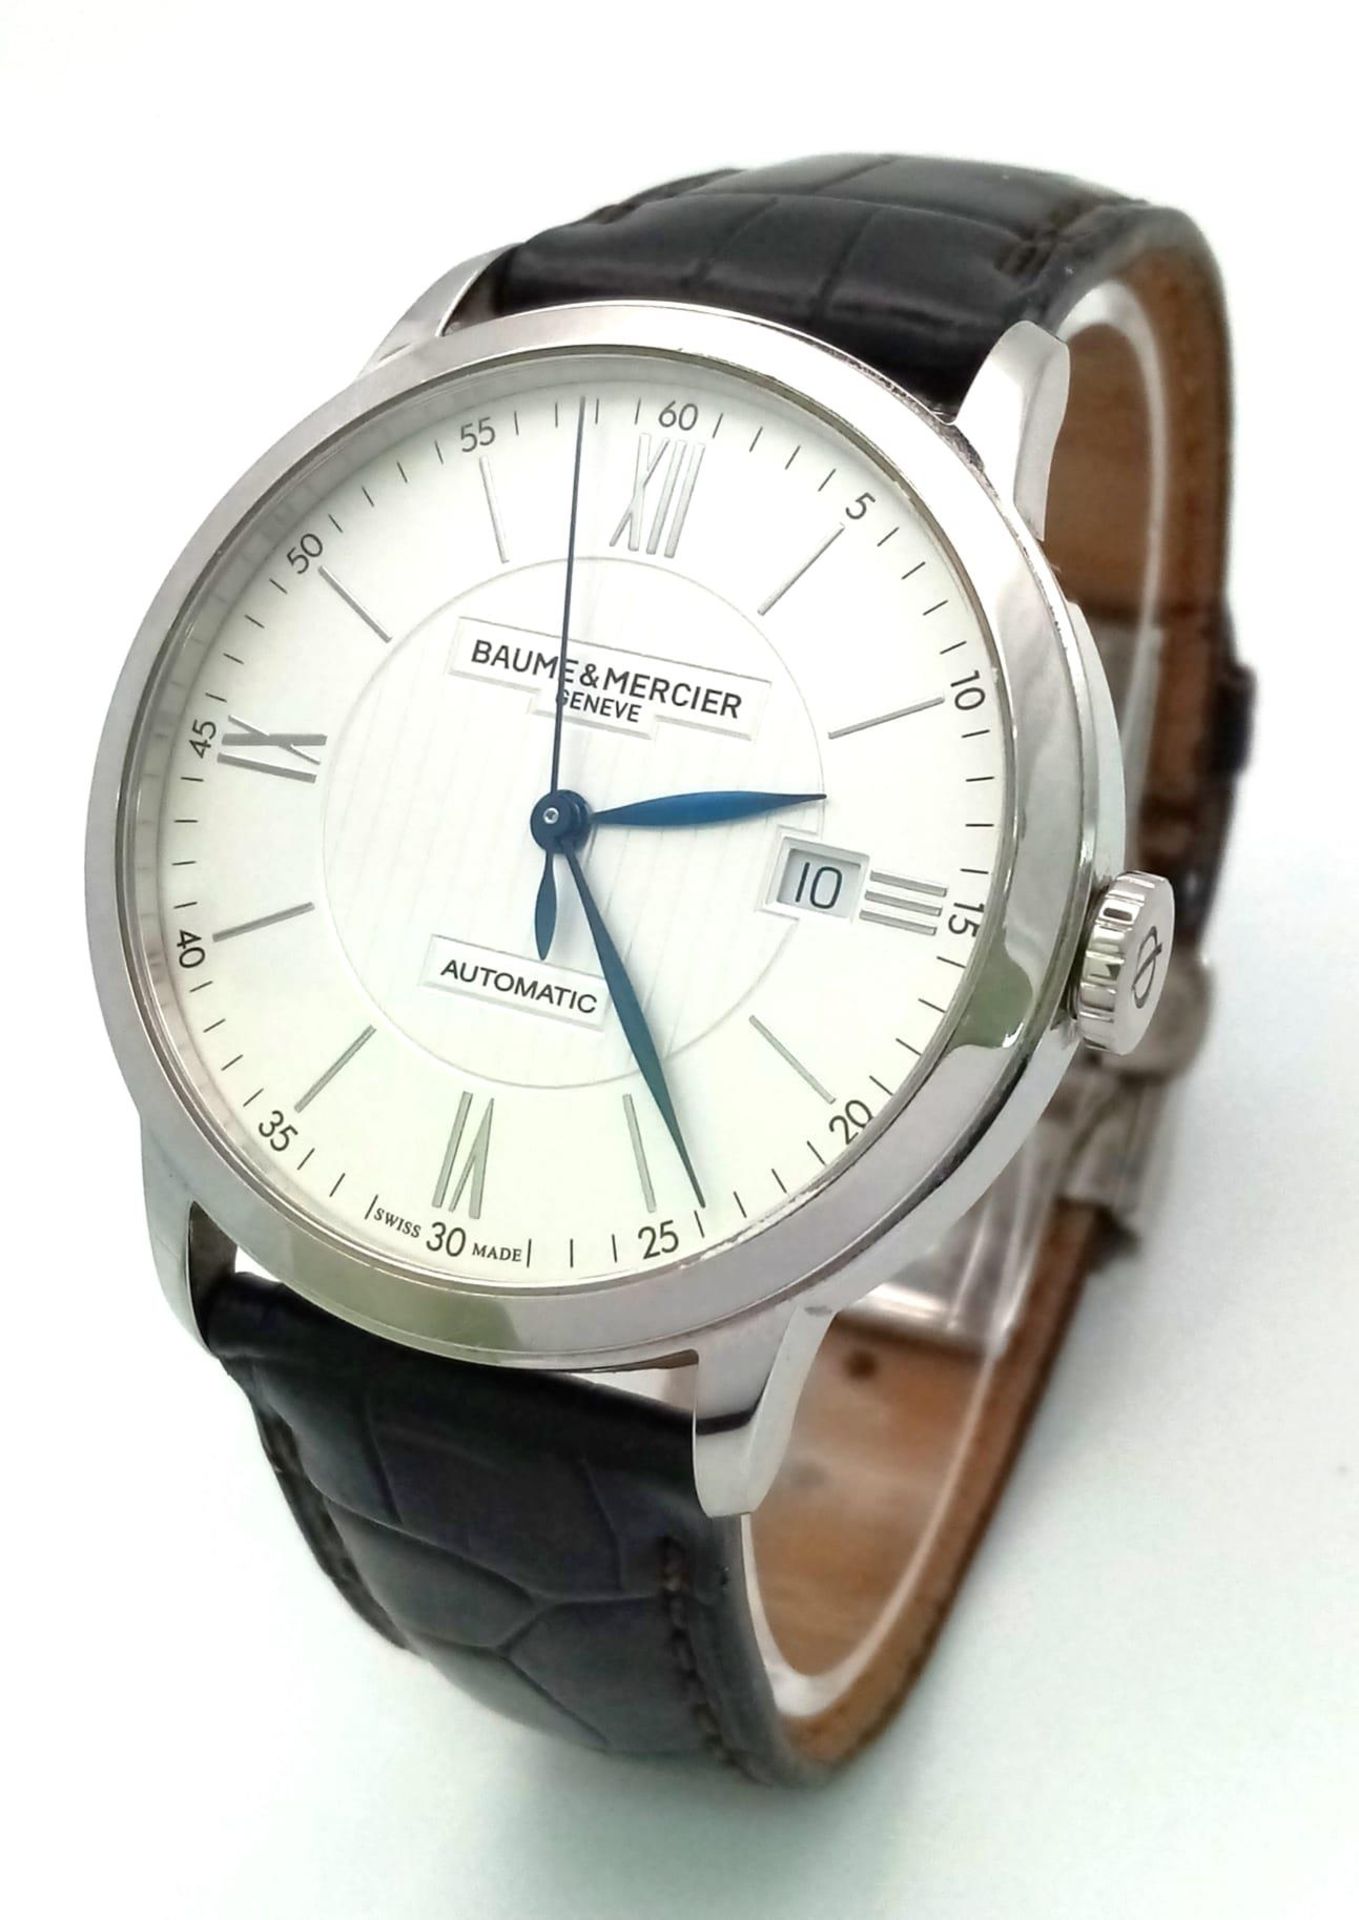 A Baume and Mercier Automatic Gents Watch. Original leather strap. Stainless steel case with